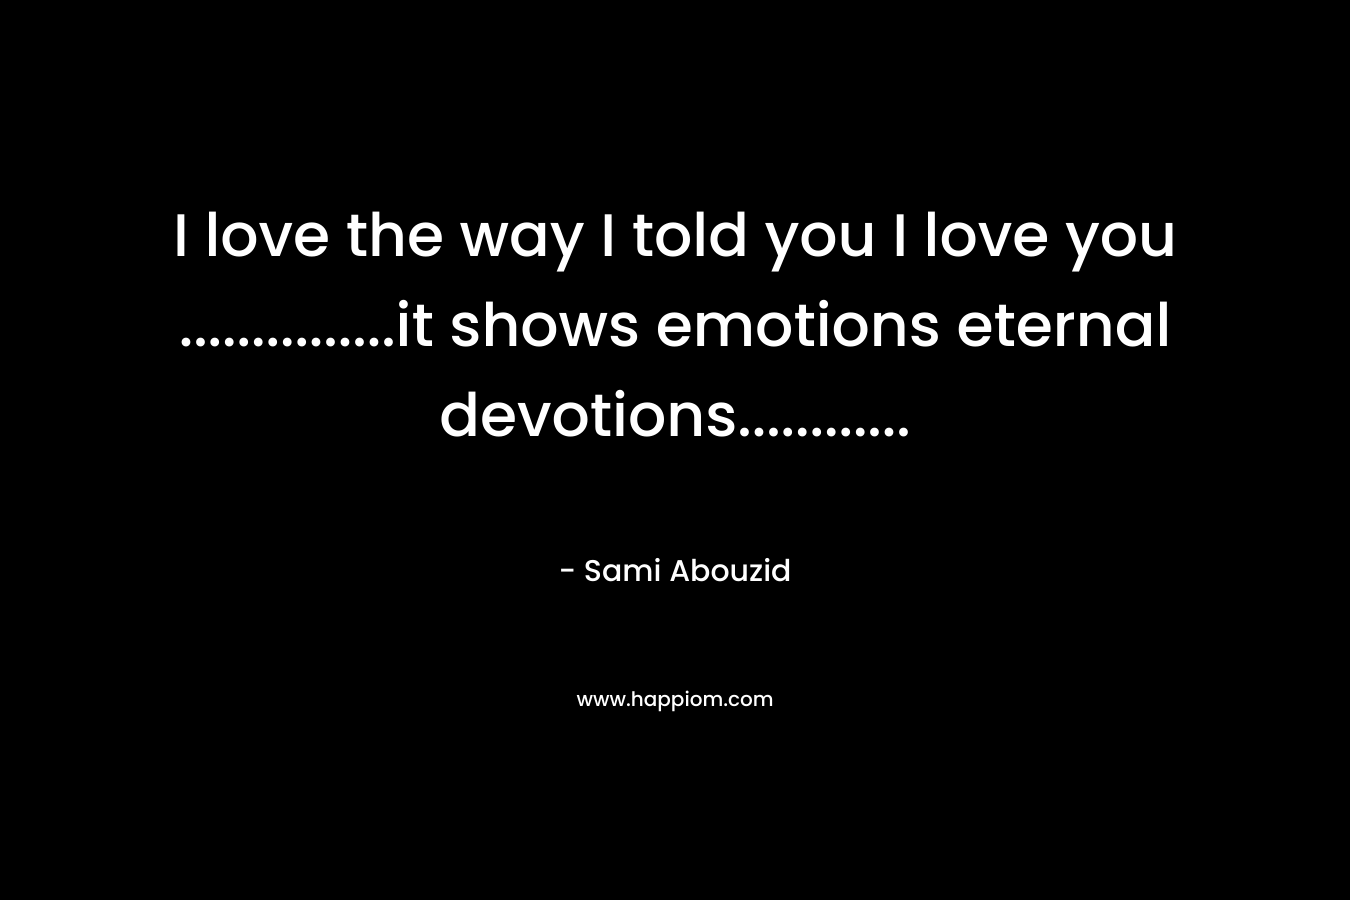 I love the way I told you I love you ...............it shows emotions eternal devotions............